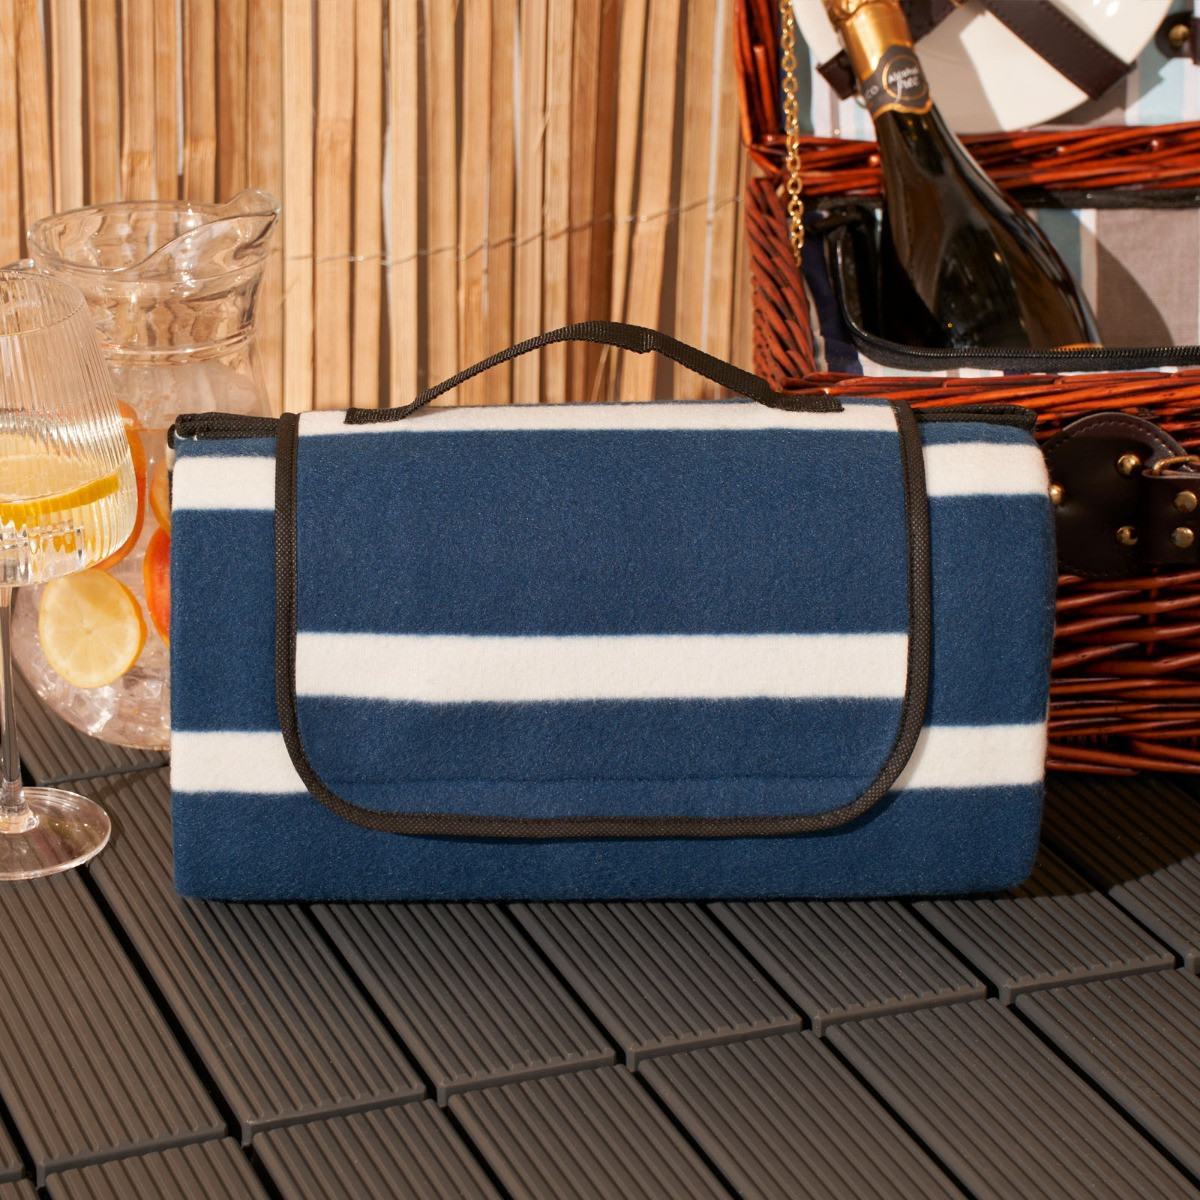 OHS Foldable Picnic Blanket, Navy And White Stripe - 130 x 150 cm>